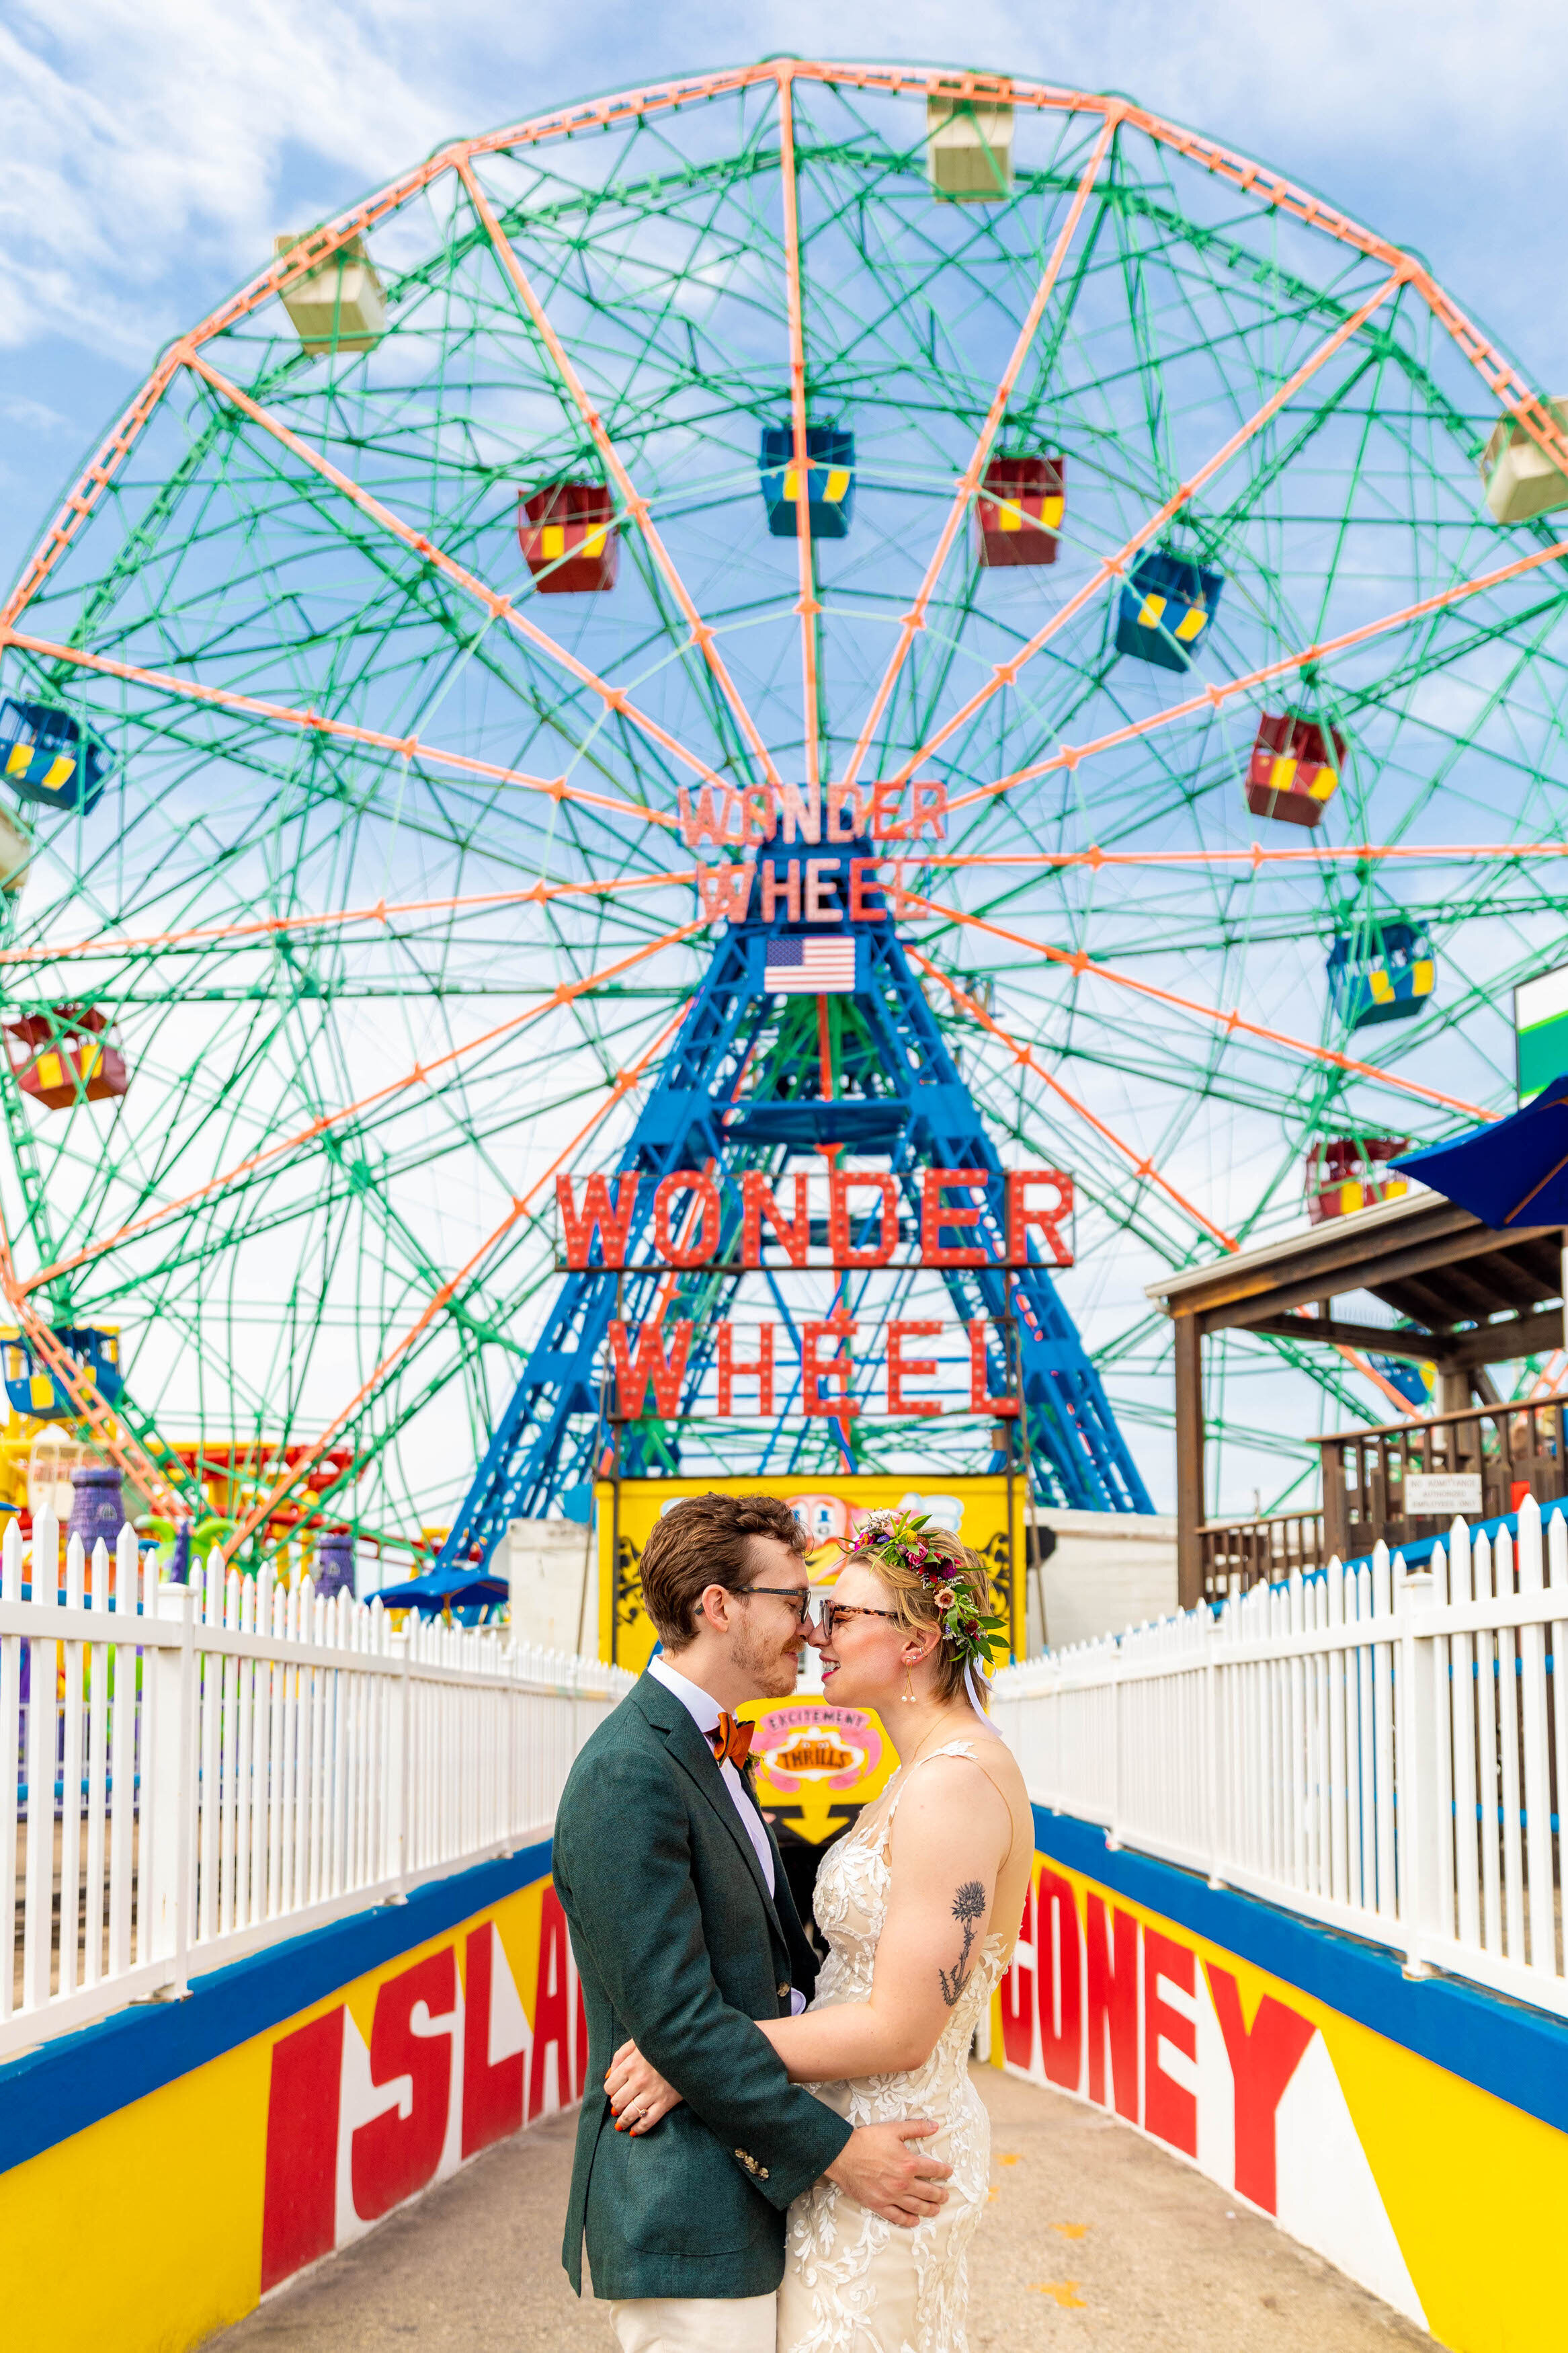 A couple with their arms around each other in front of a ferris wheel.